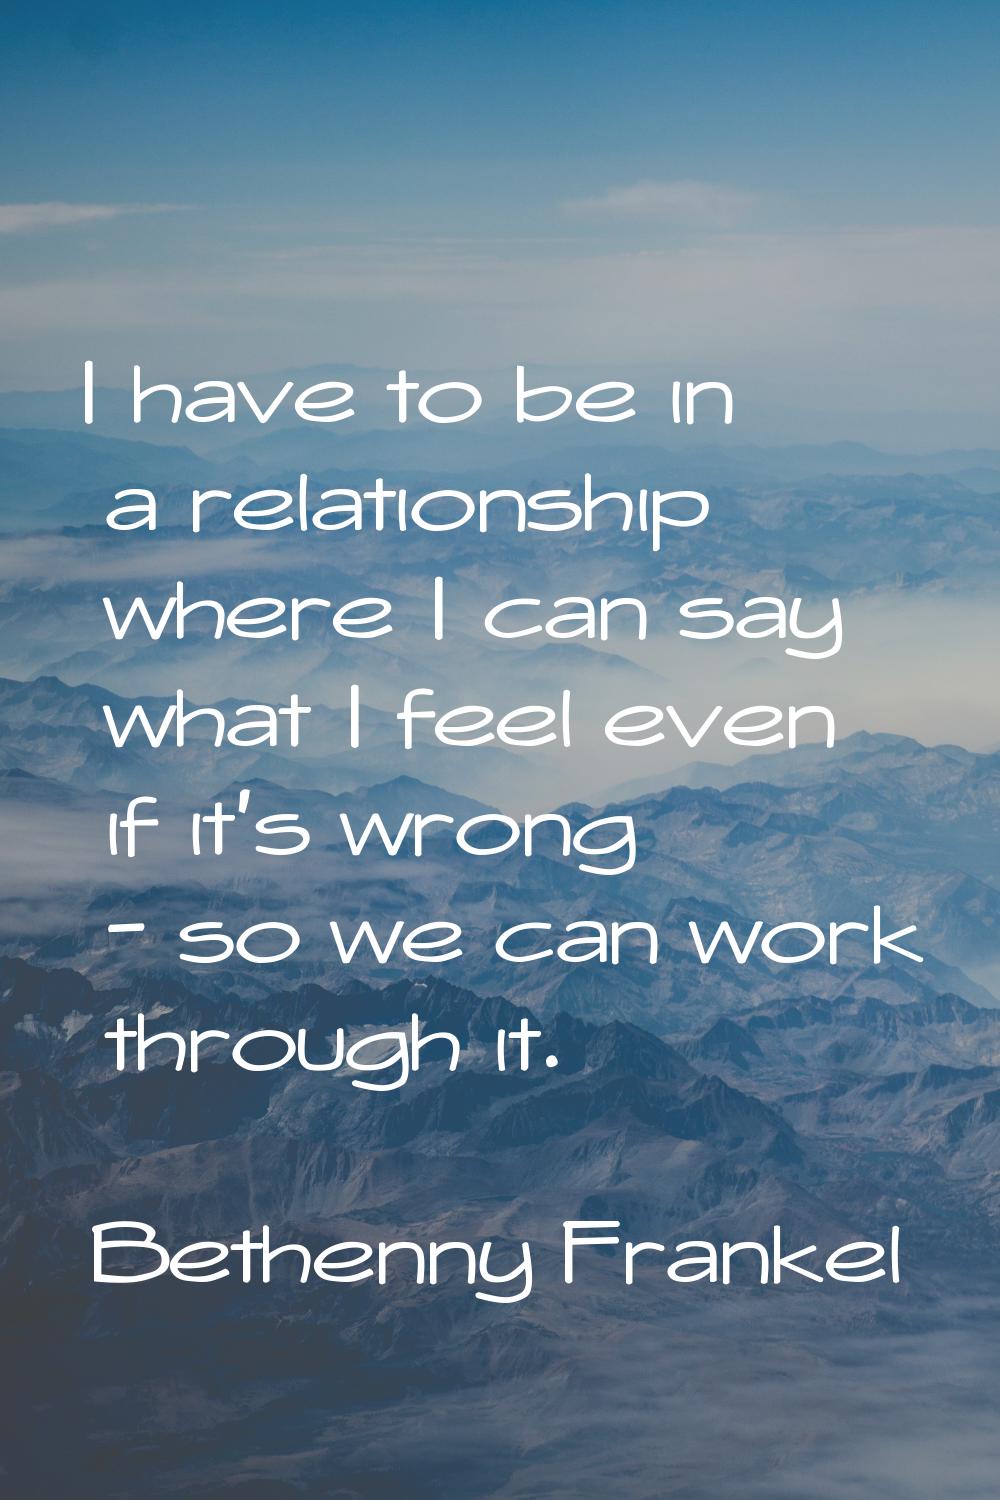 I have to be in a relationship where I can say what I feel even if it's wrong - so we can work thro